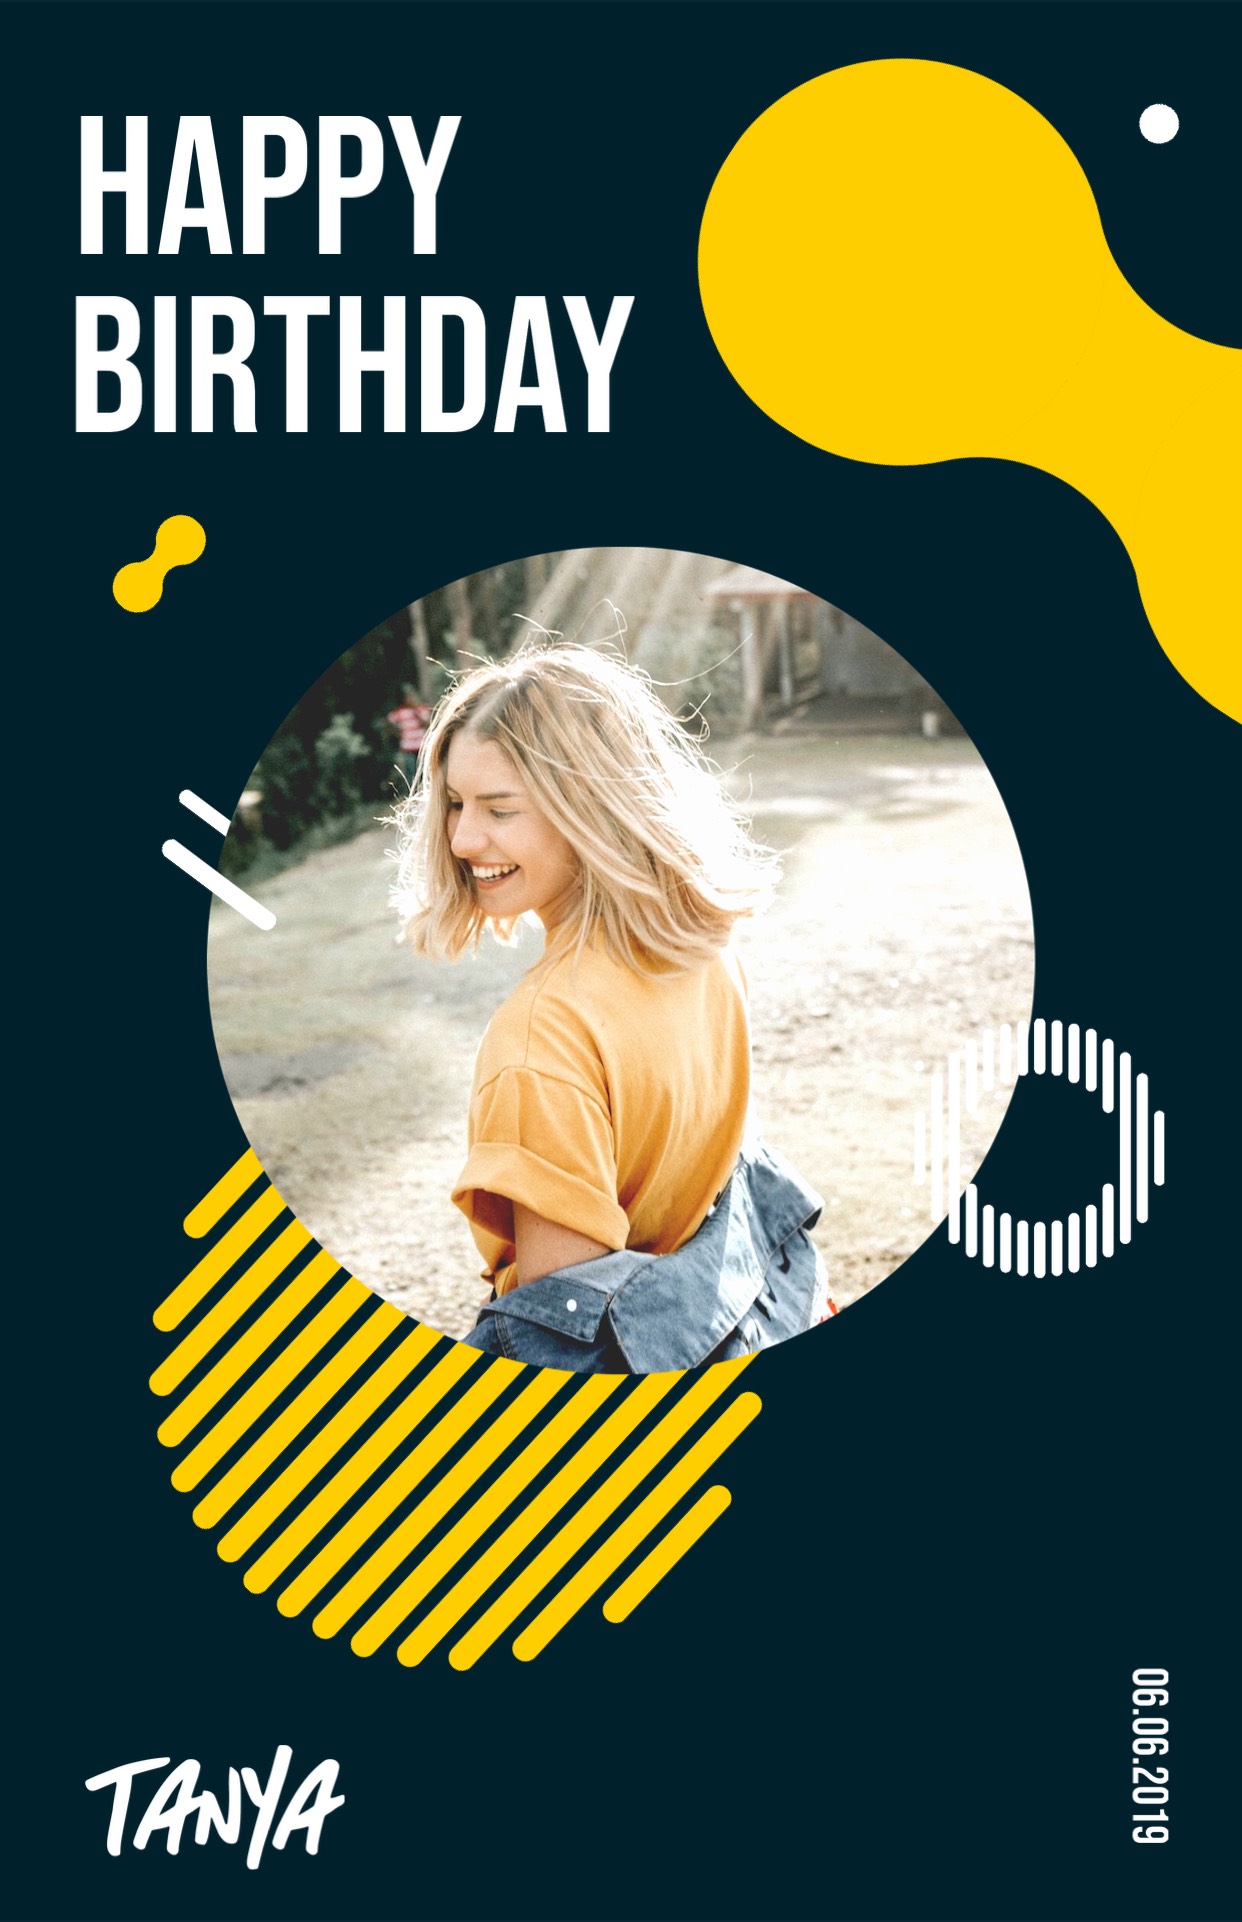 Women Smiling In The Sun Happy Birthday Template